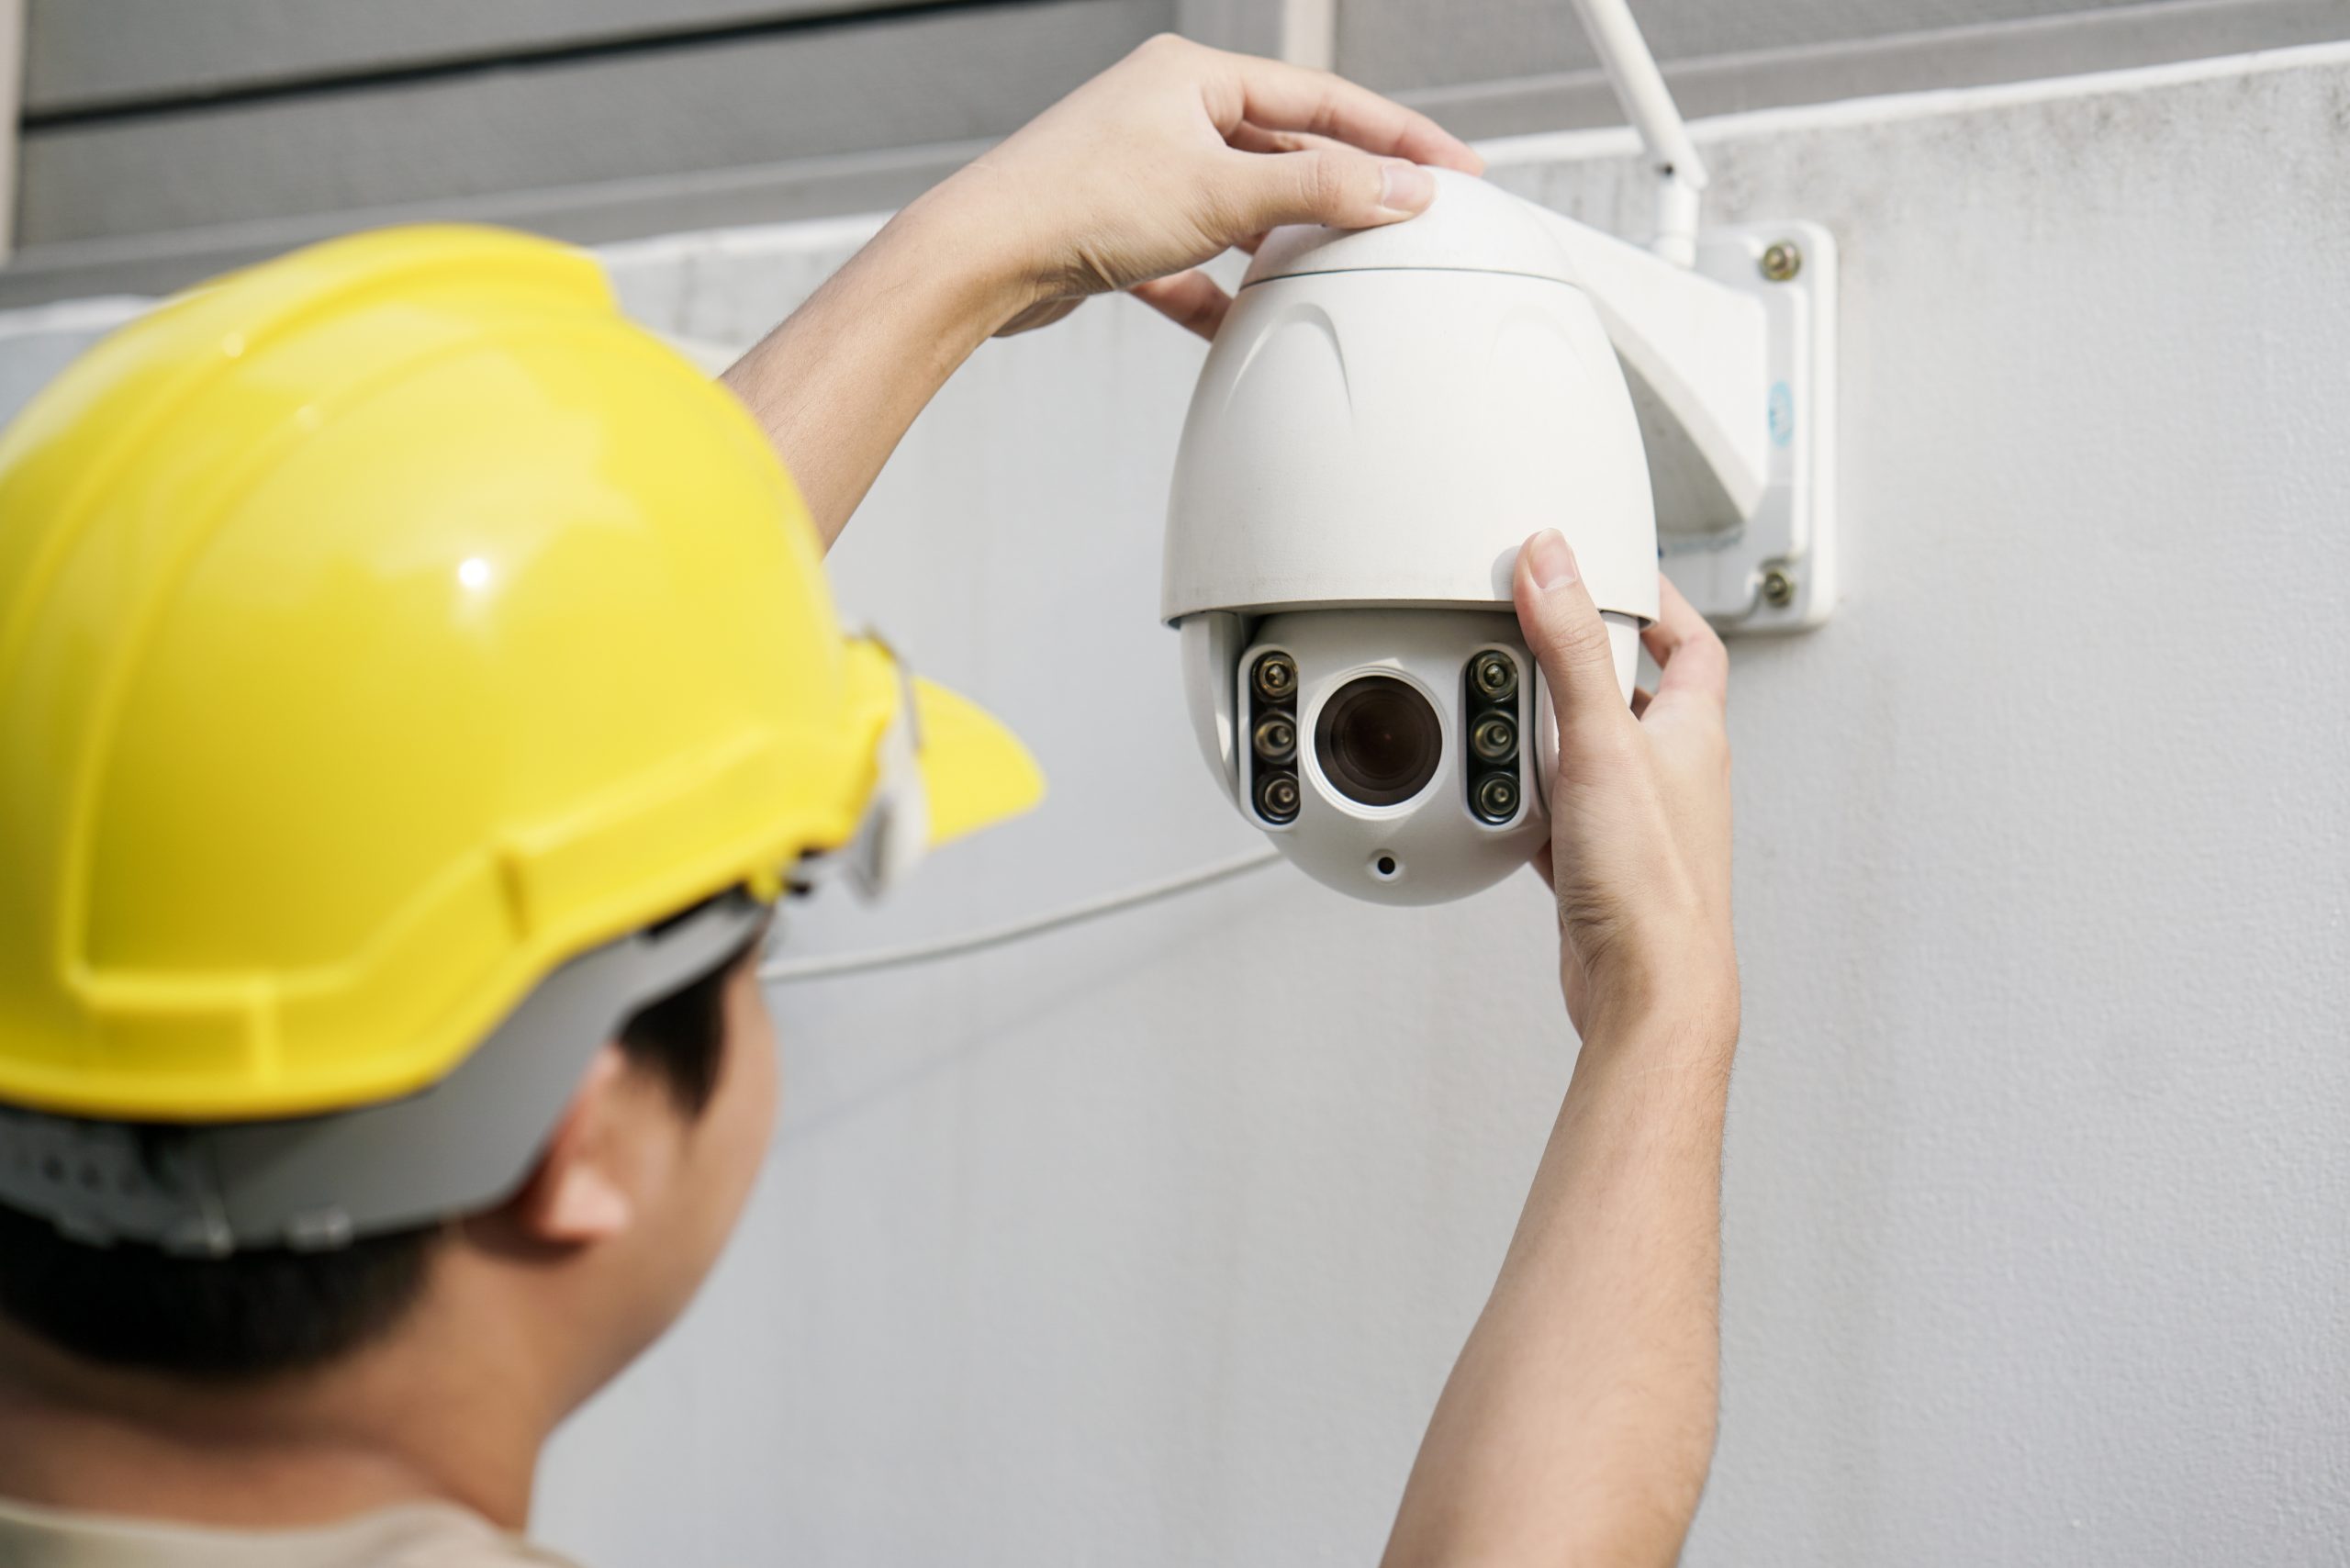 Close Up Of Male Technician Fixing CCTV Camera On Wall